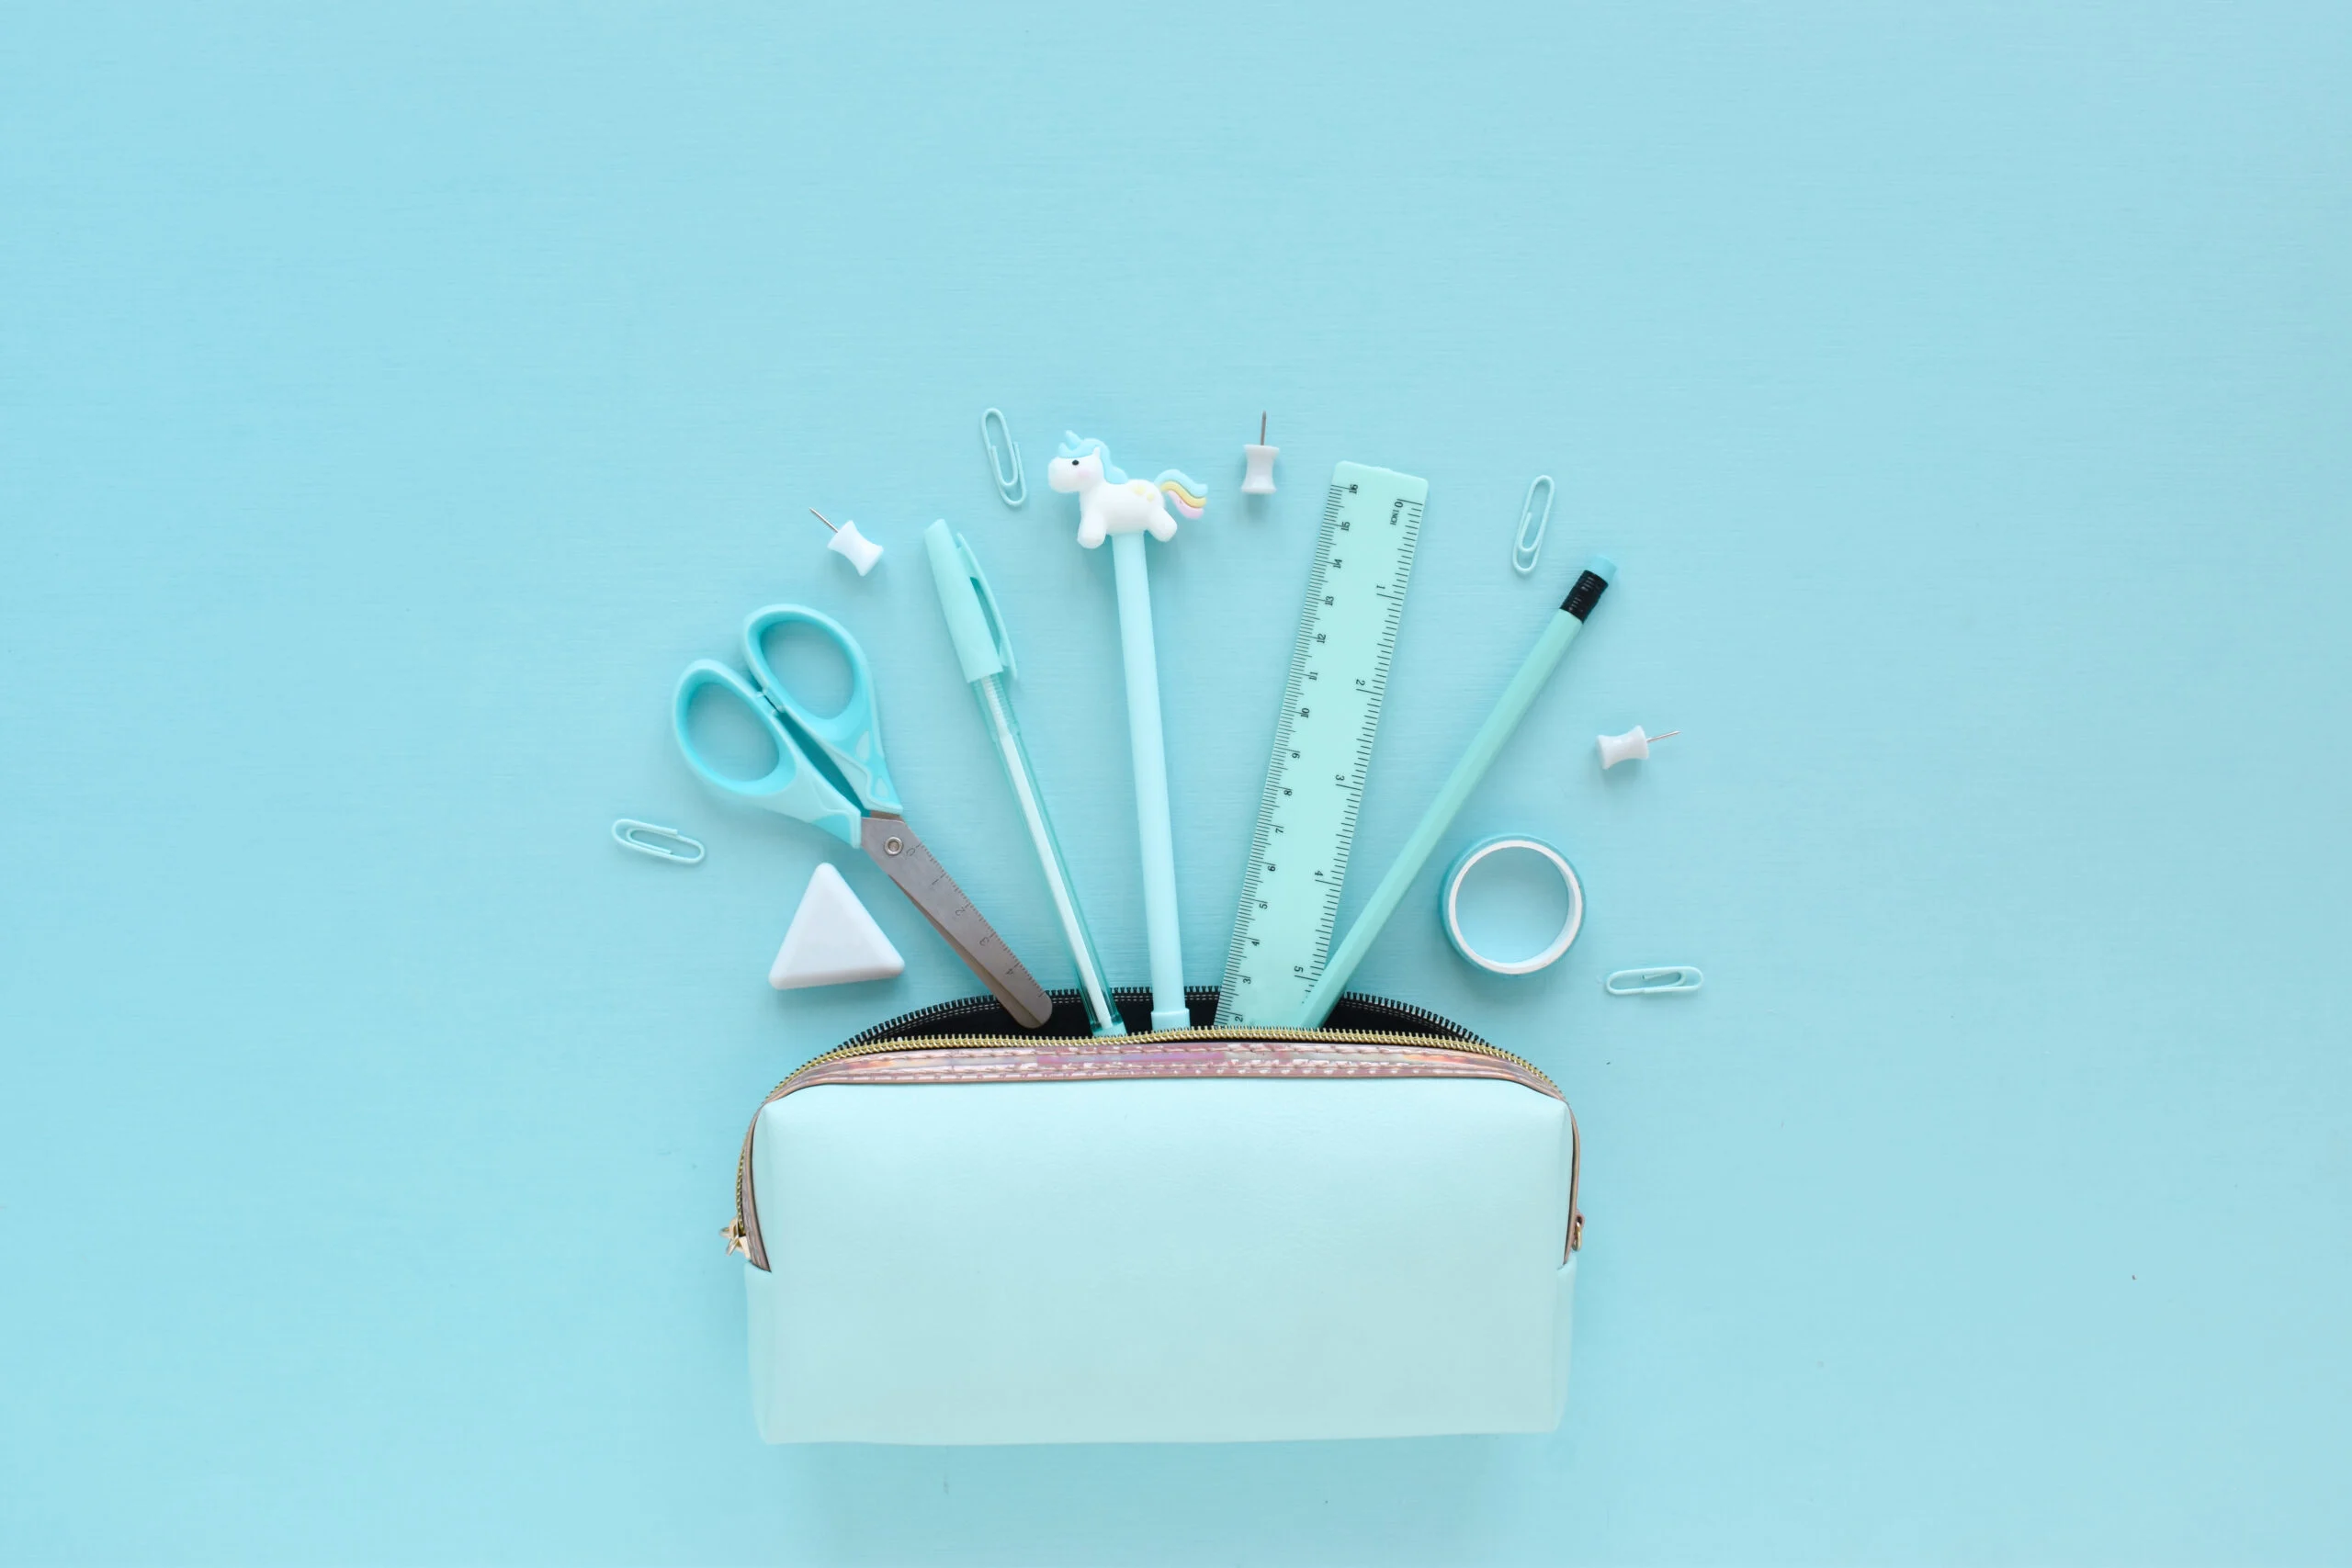 Light Blue Pencil Case With Stationery On A Light Pastel Background. Flat Lay